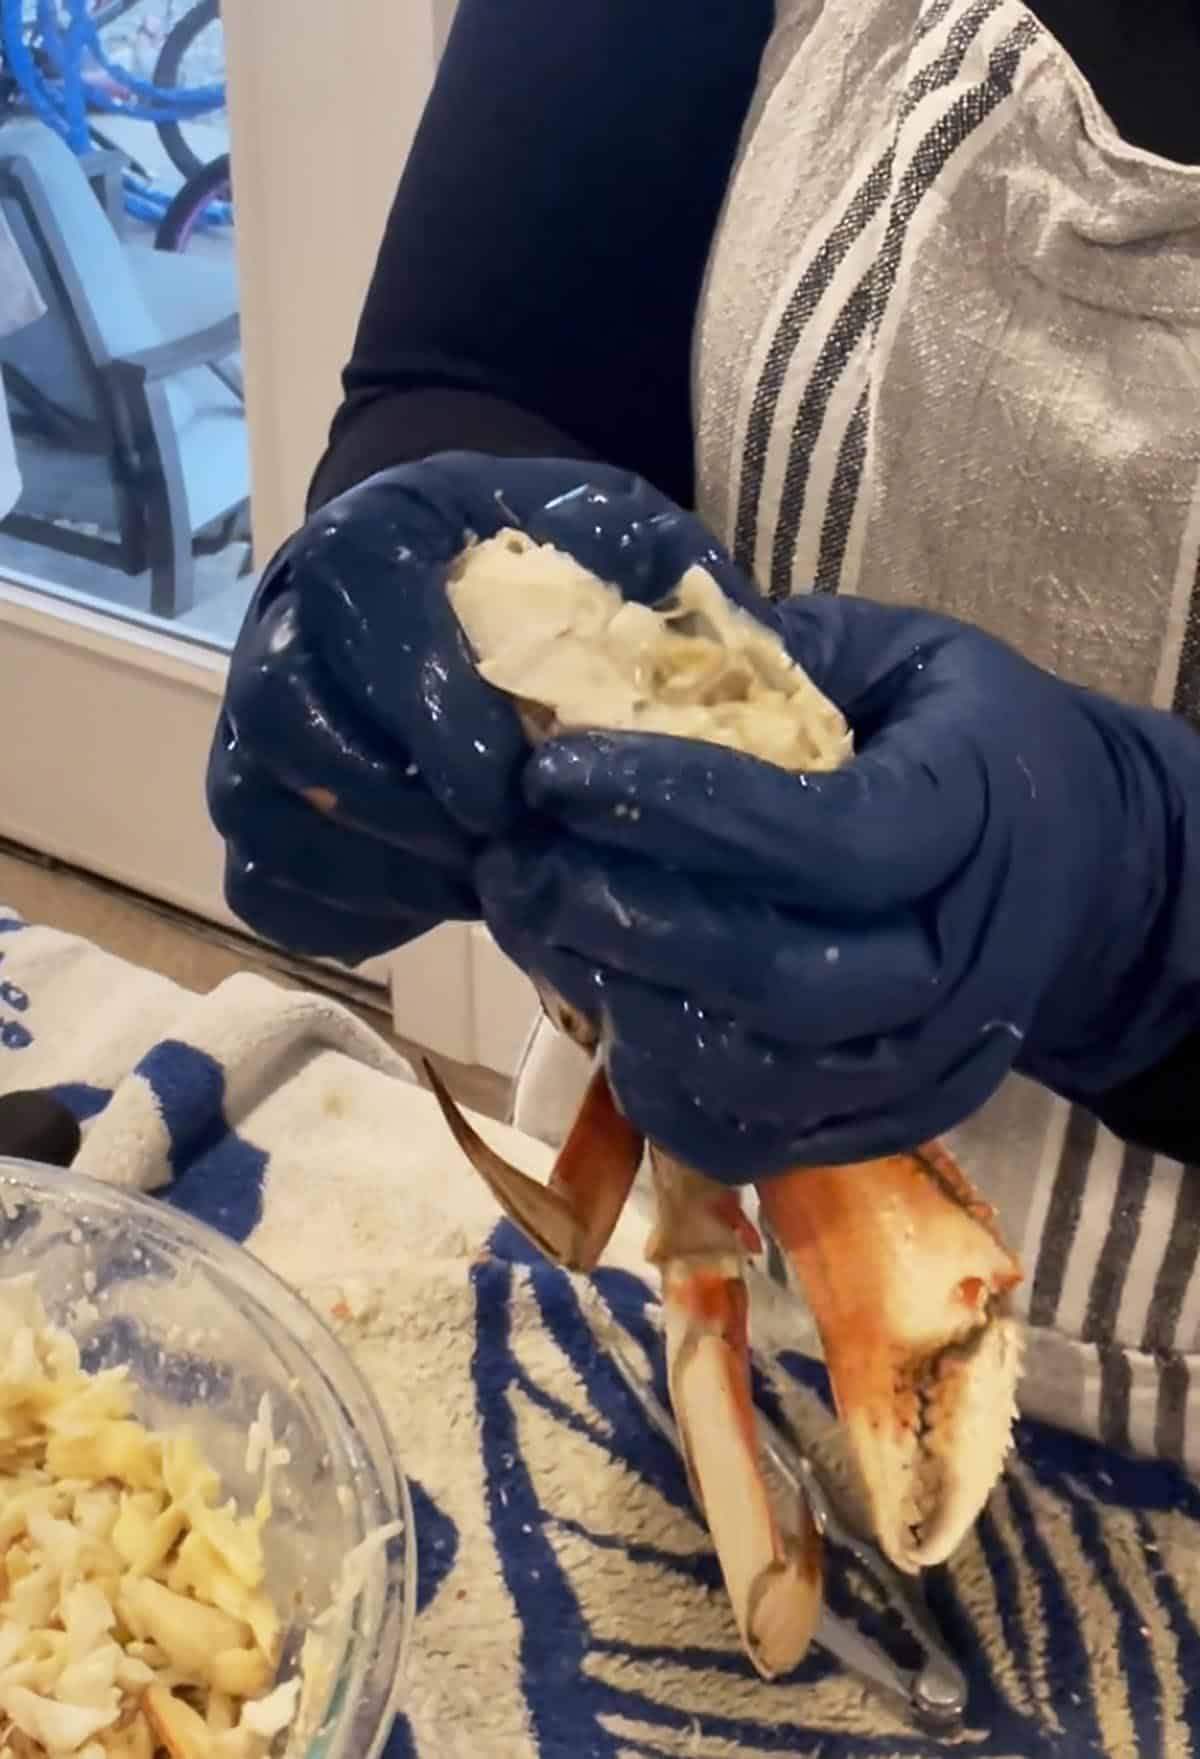 Two hands squeezing the body of a crab